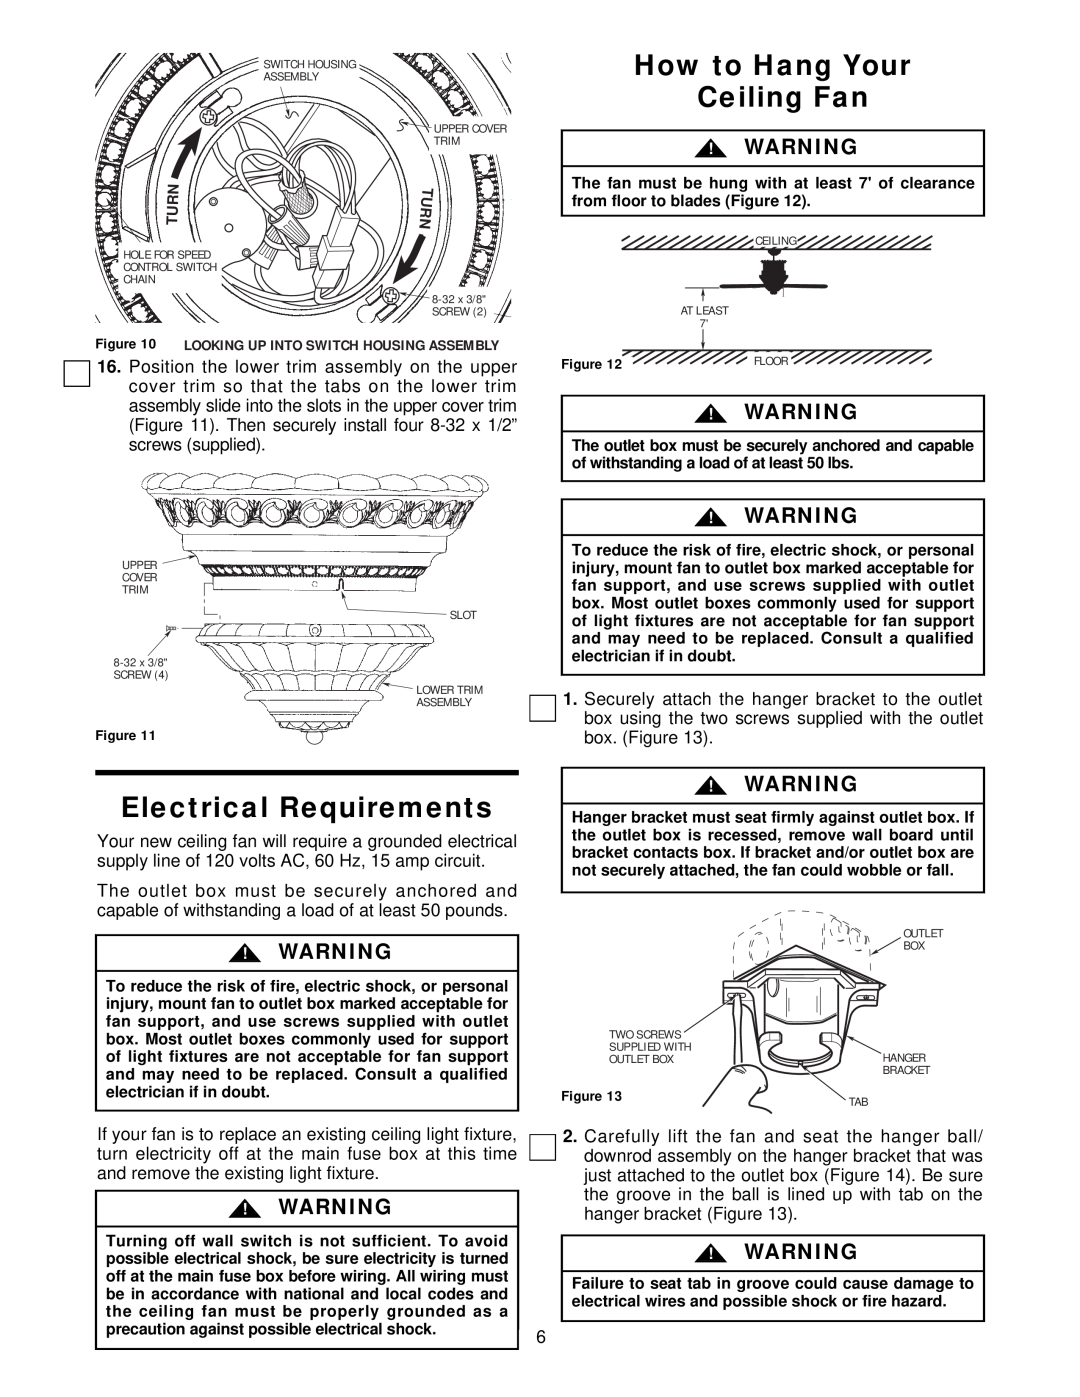 Emerson CF1WB01, CF1AB01, CF1PW01 owner manual Electrical Requirements, How to Hang Your Ceiling Fan, Turn 